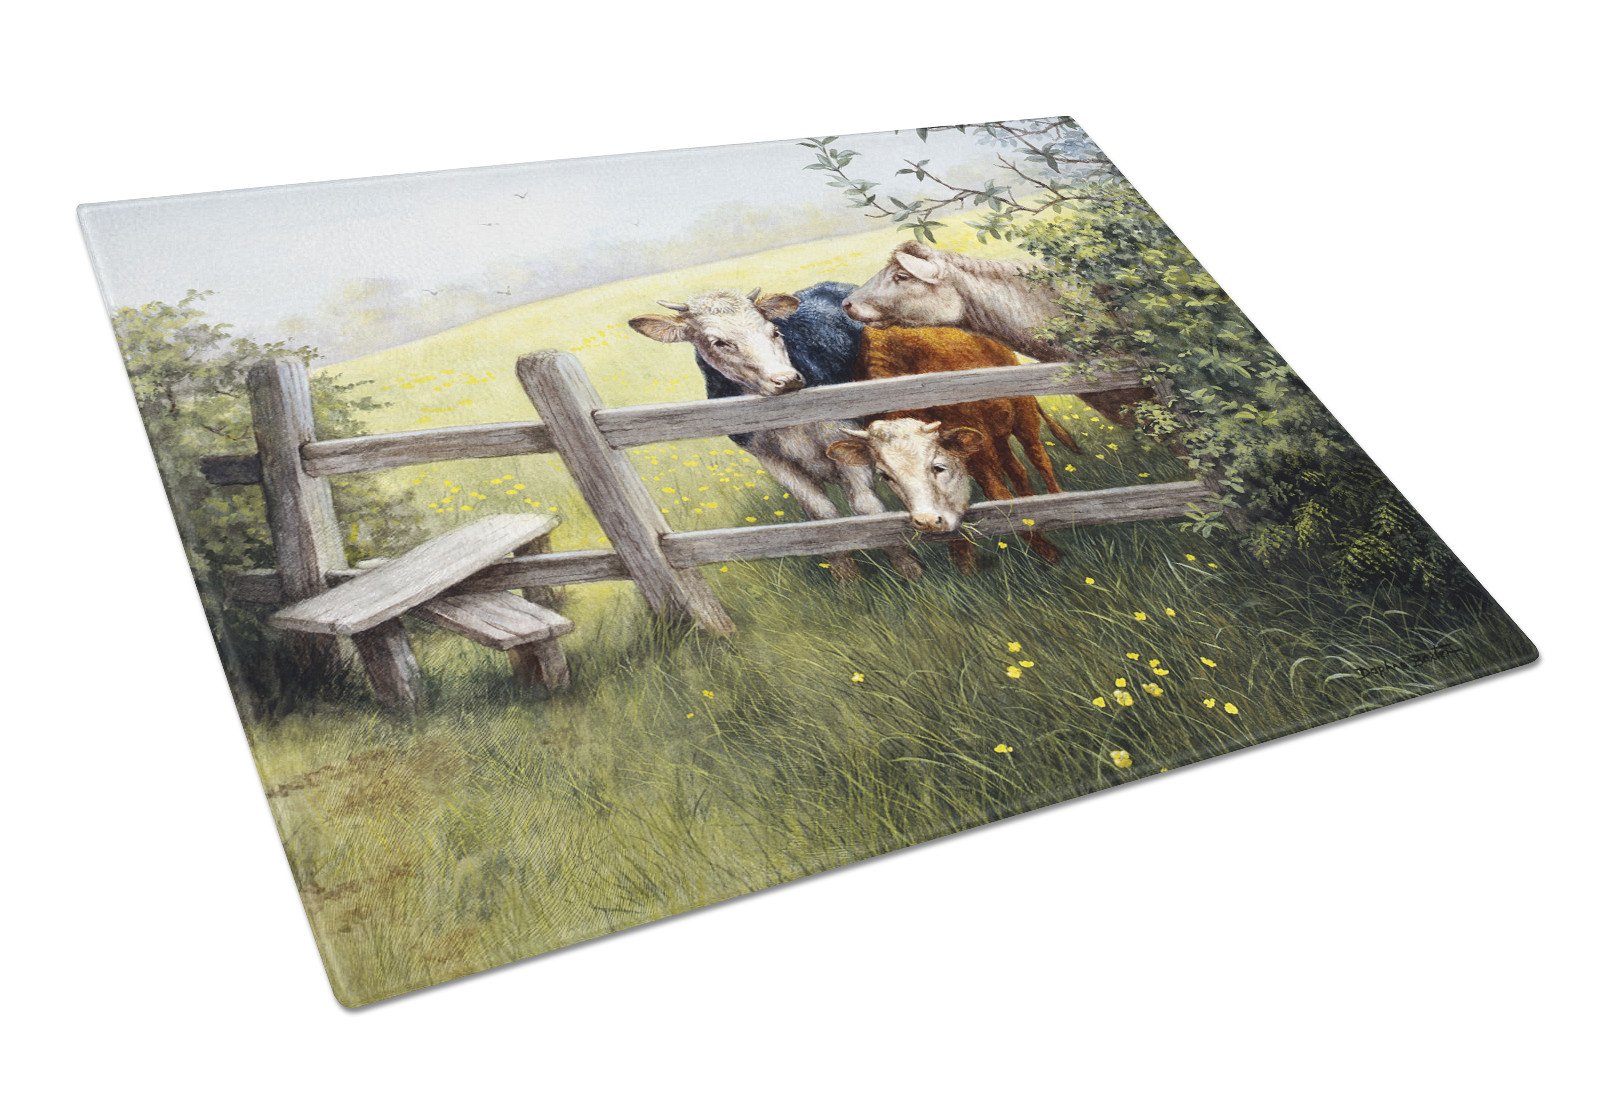 Cows in a Buttercup Meadow Glass Cutting Board Large BDBA0103LCB by Caroline's Treasures